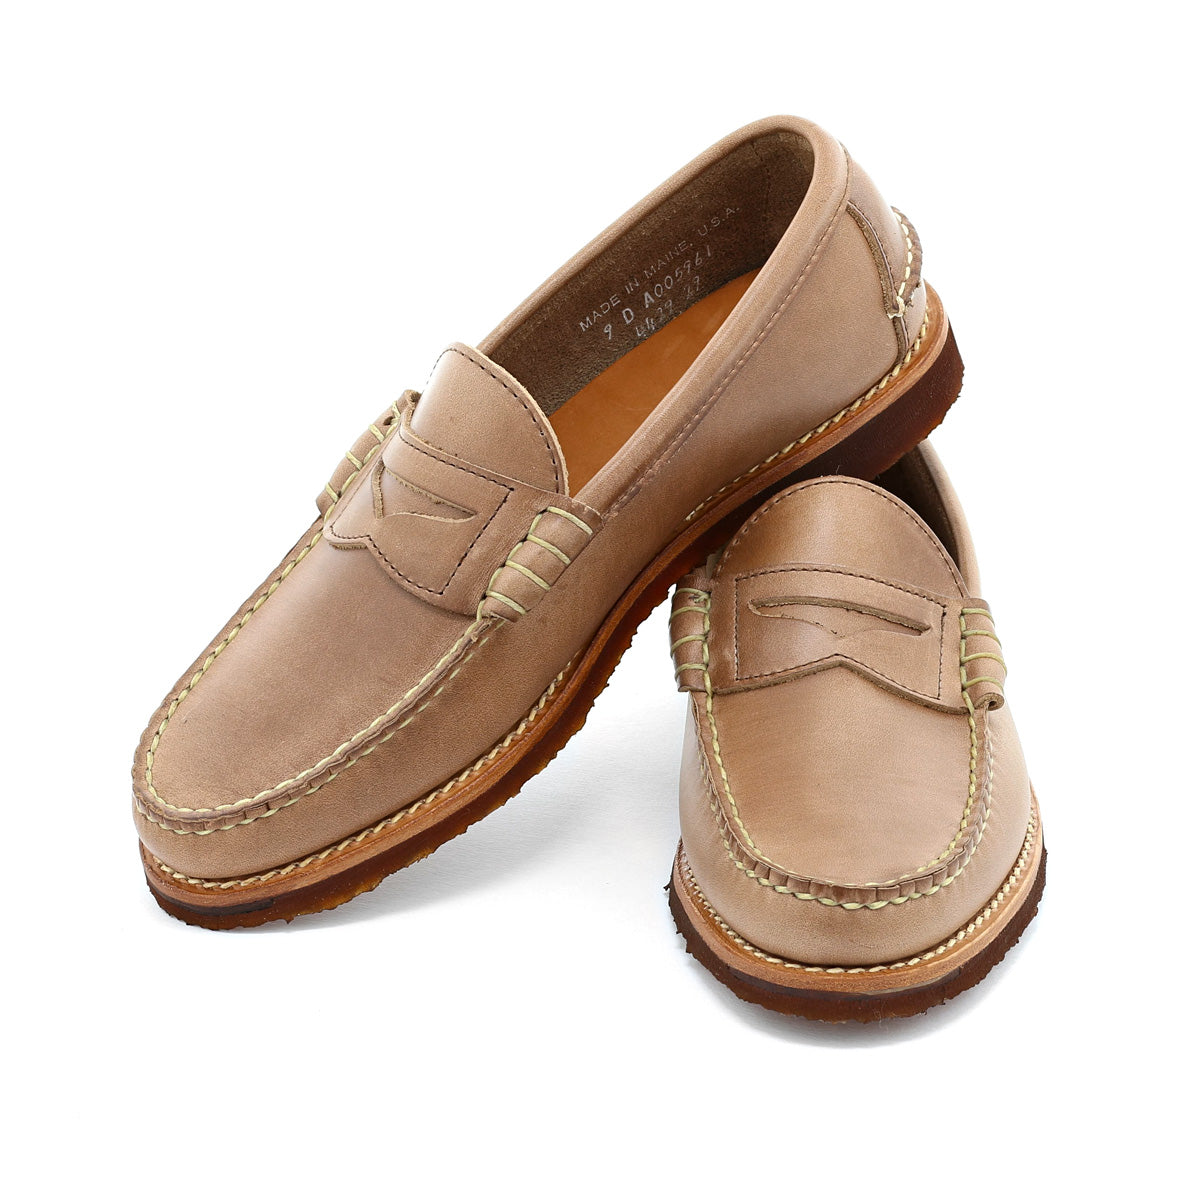 Beefroll Penny Loafers LH - Natural Chromexcel | Rancourt & Co. | Men's Boots and